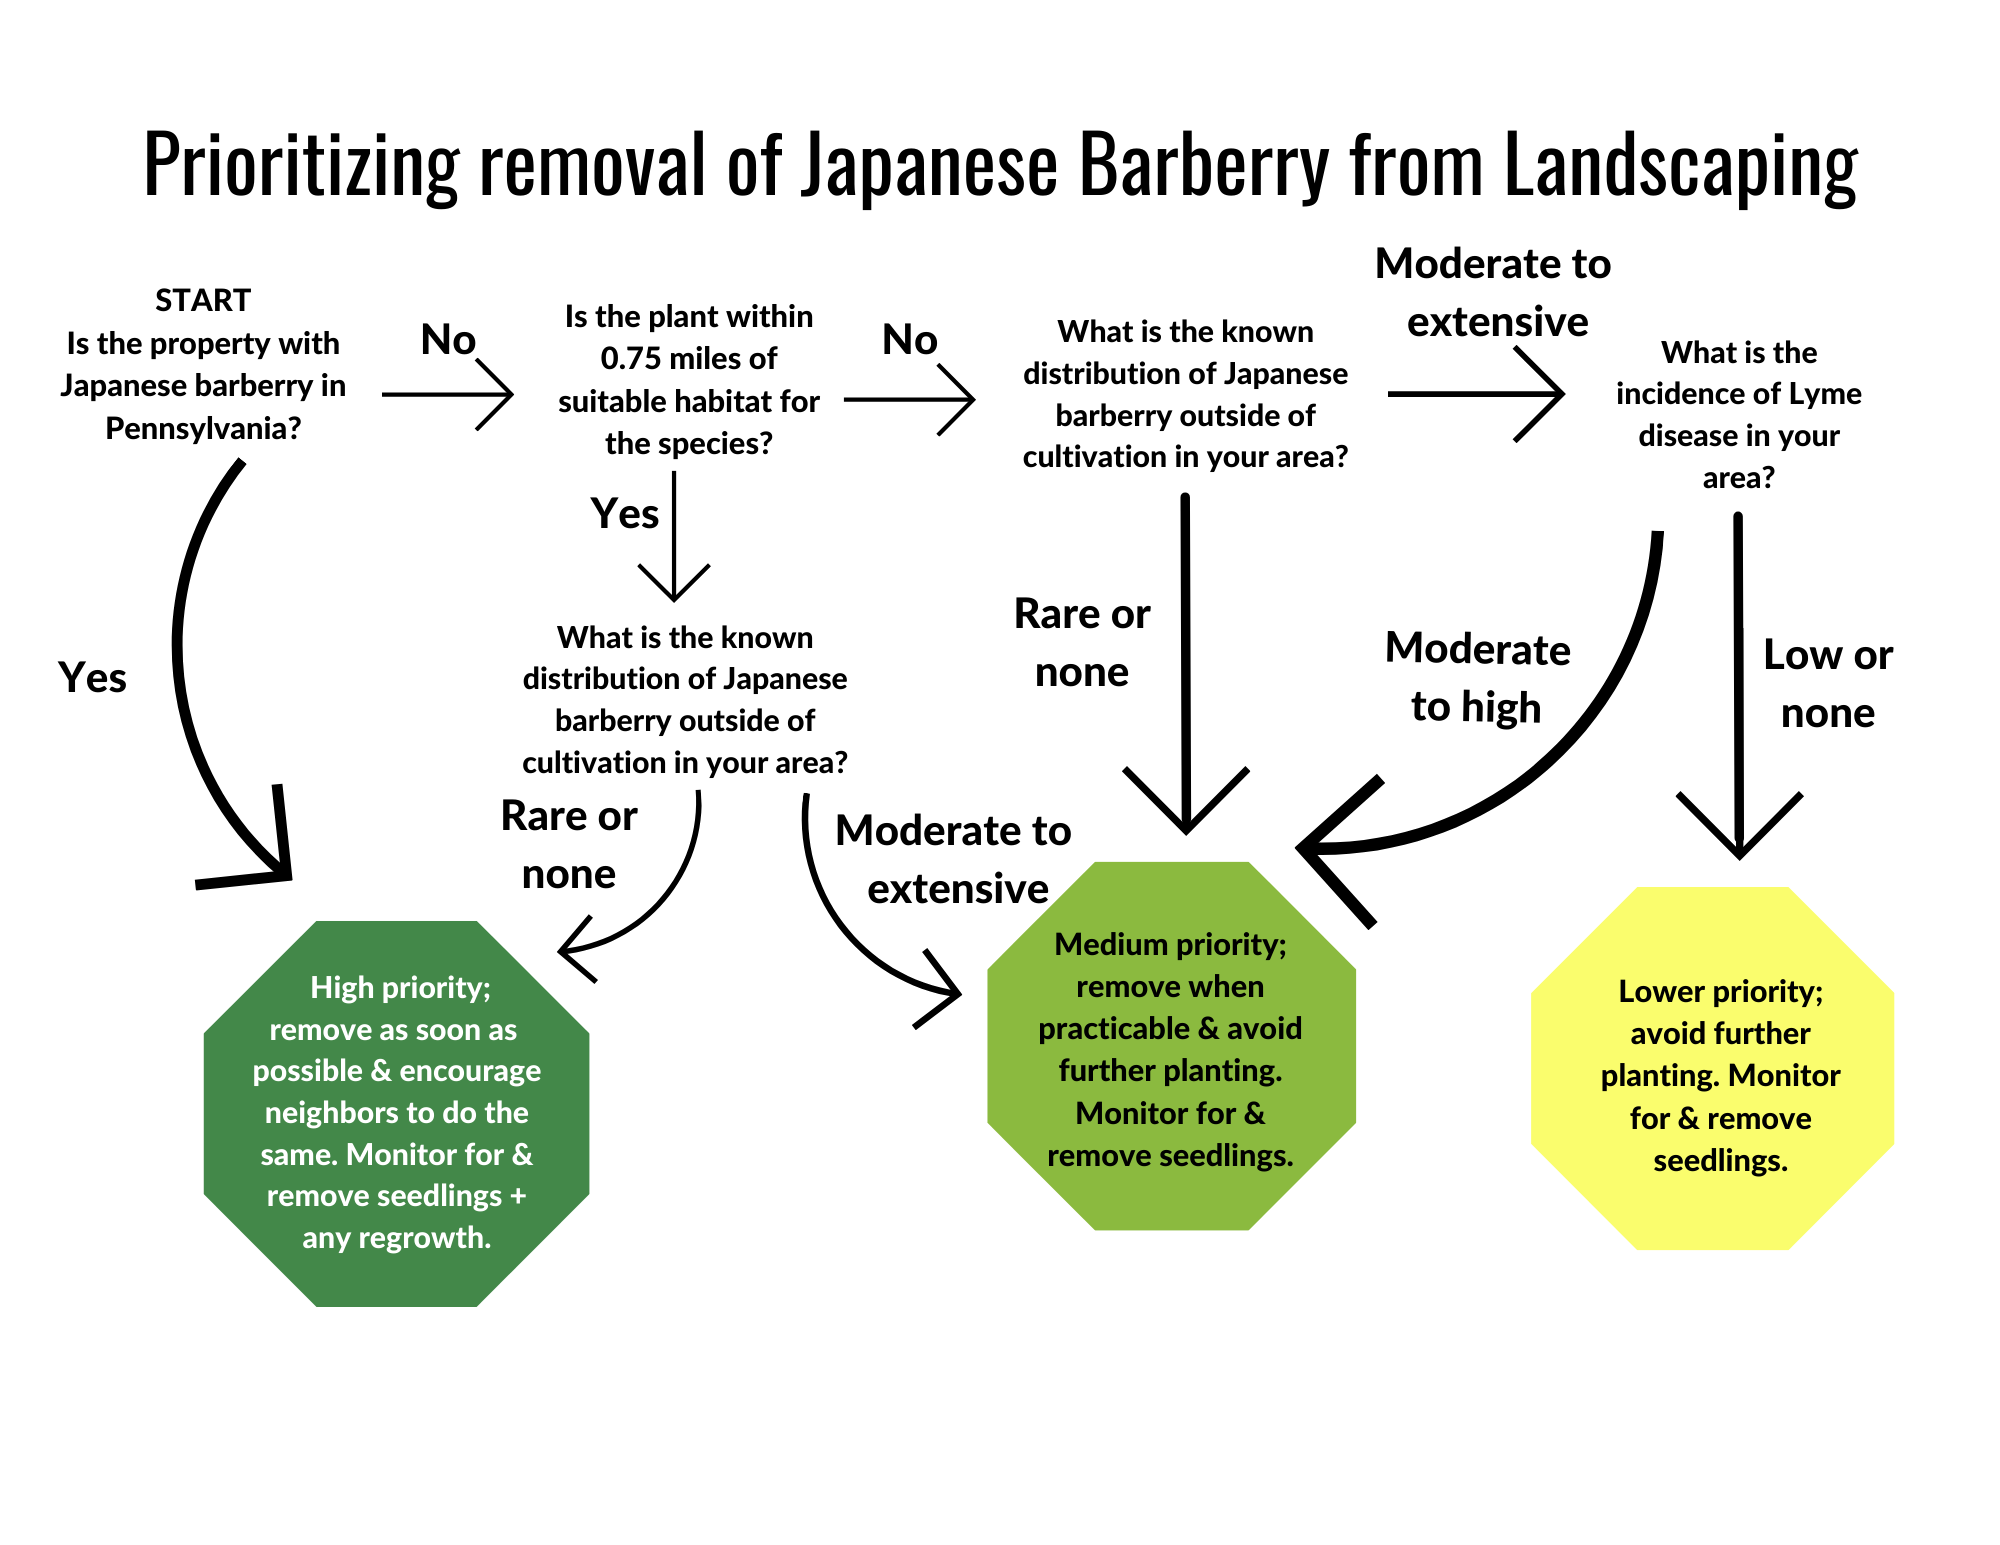 removal decision tree for Japanese barberry